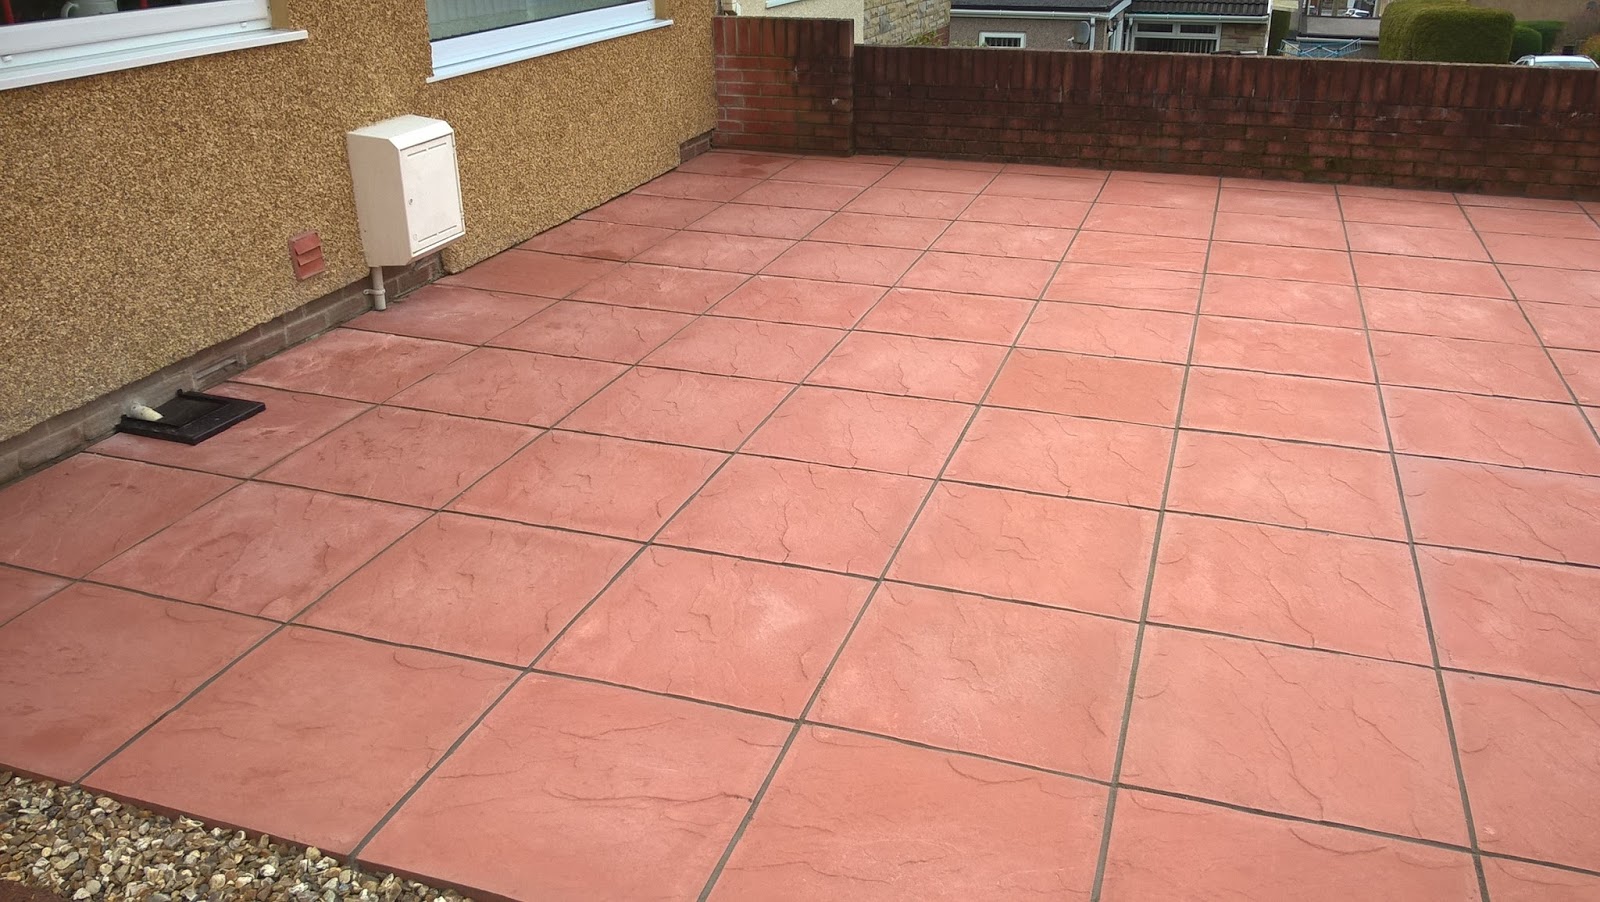 CWM LLYNFI BRICKLAYING : Red concrete paving slabs 600mm x 600mm with